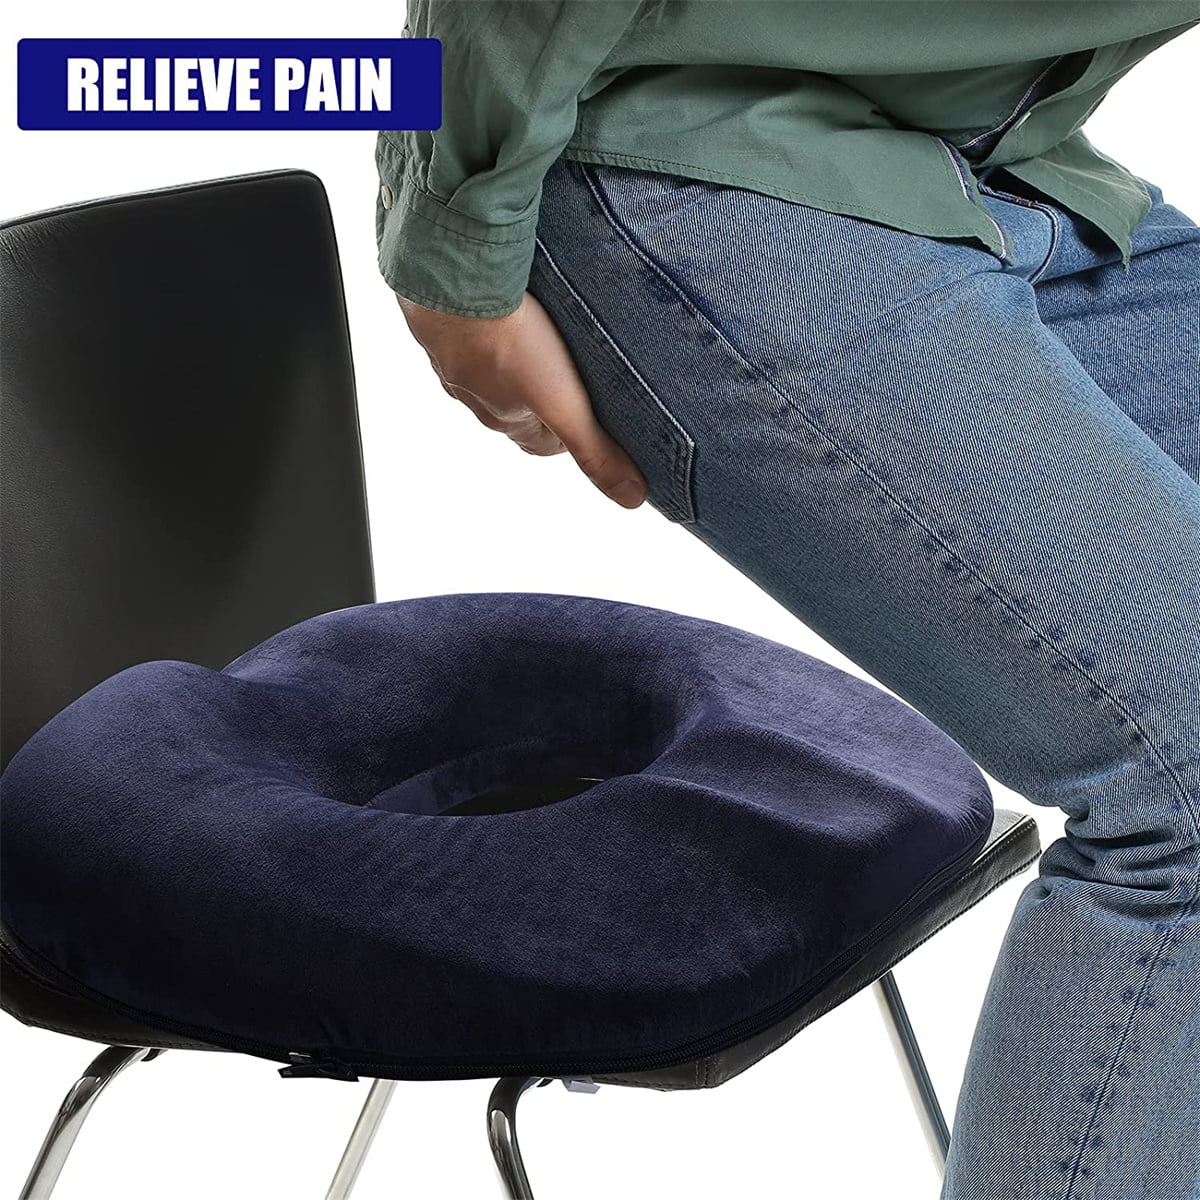 wefaner Donut Pillow for Tailbone Pain Inflatable Butt Donut Cushion  Self-Inflating Bedsore Air Cushion.Tailbone Pain Relief Cushion for  Hemorrhoids